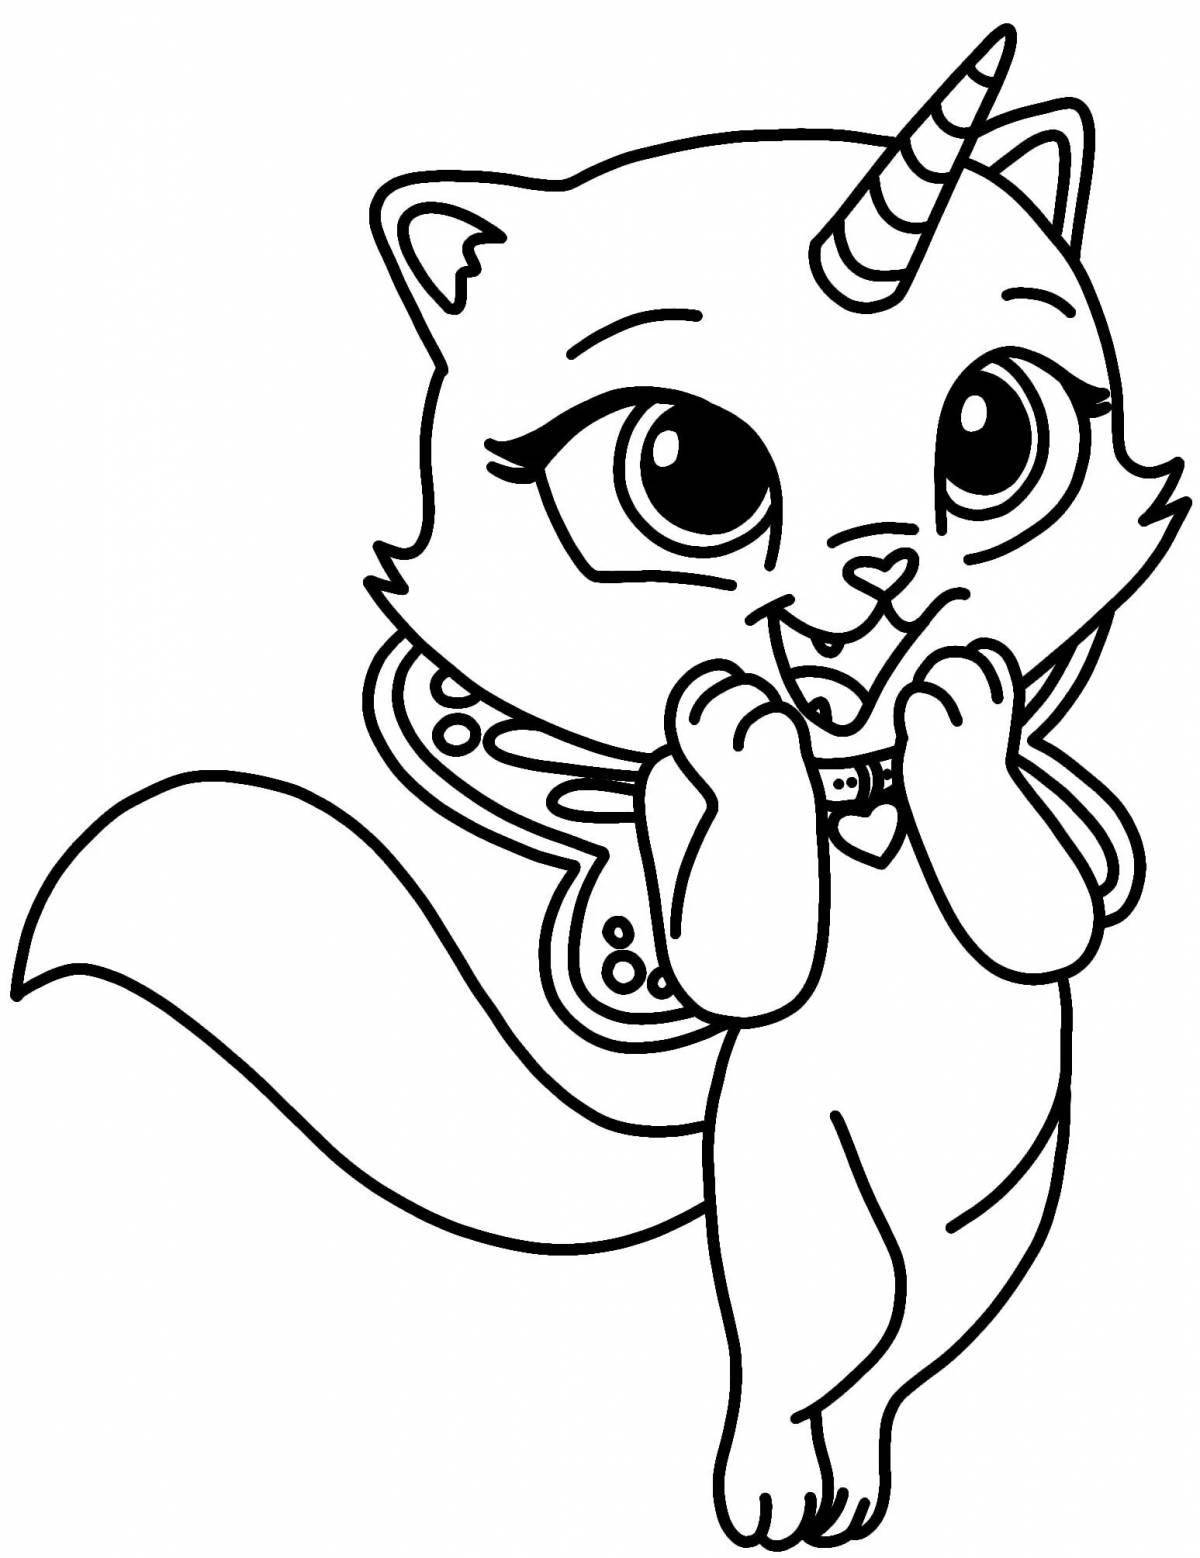 Royal coloring cat unicorn for kids